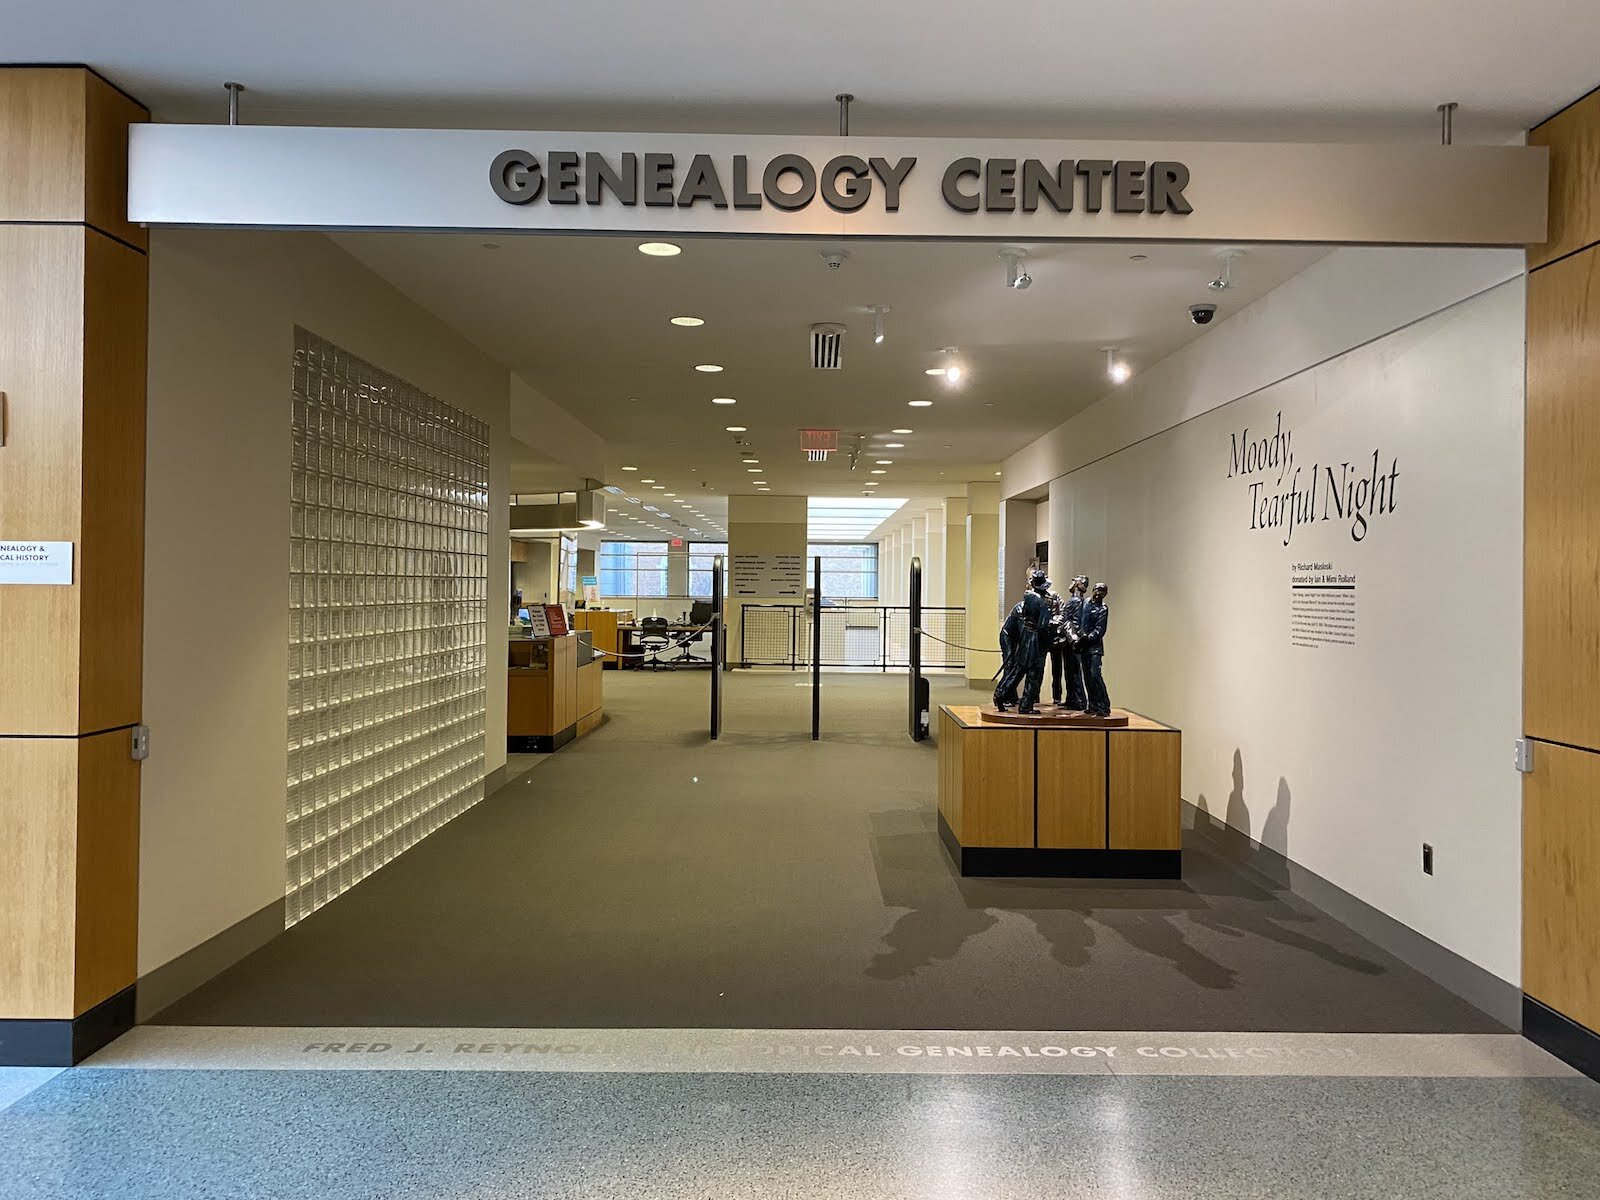 Anyone can conduct family research at the Allen County Public Library's Genealogy Center.